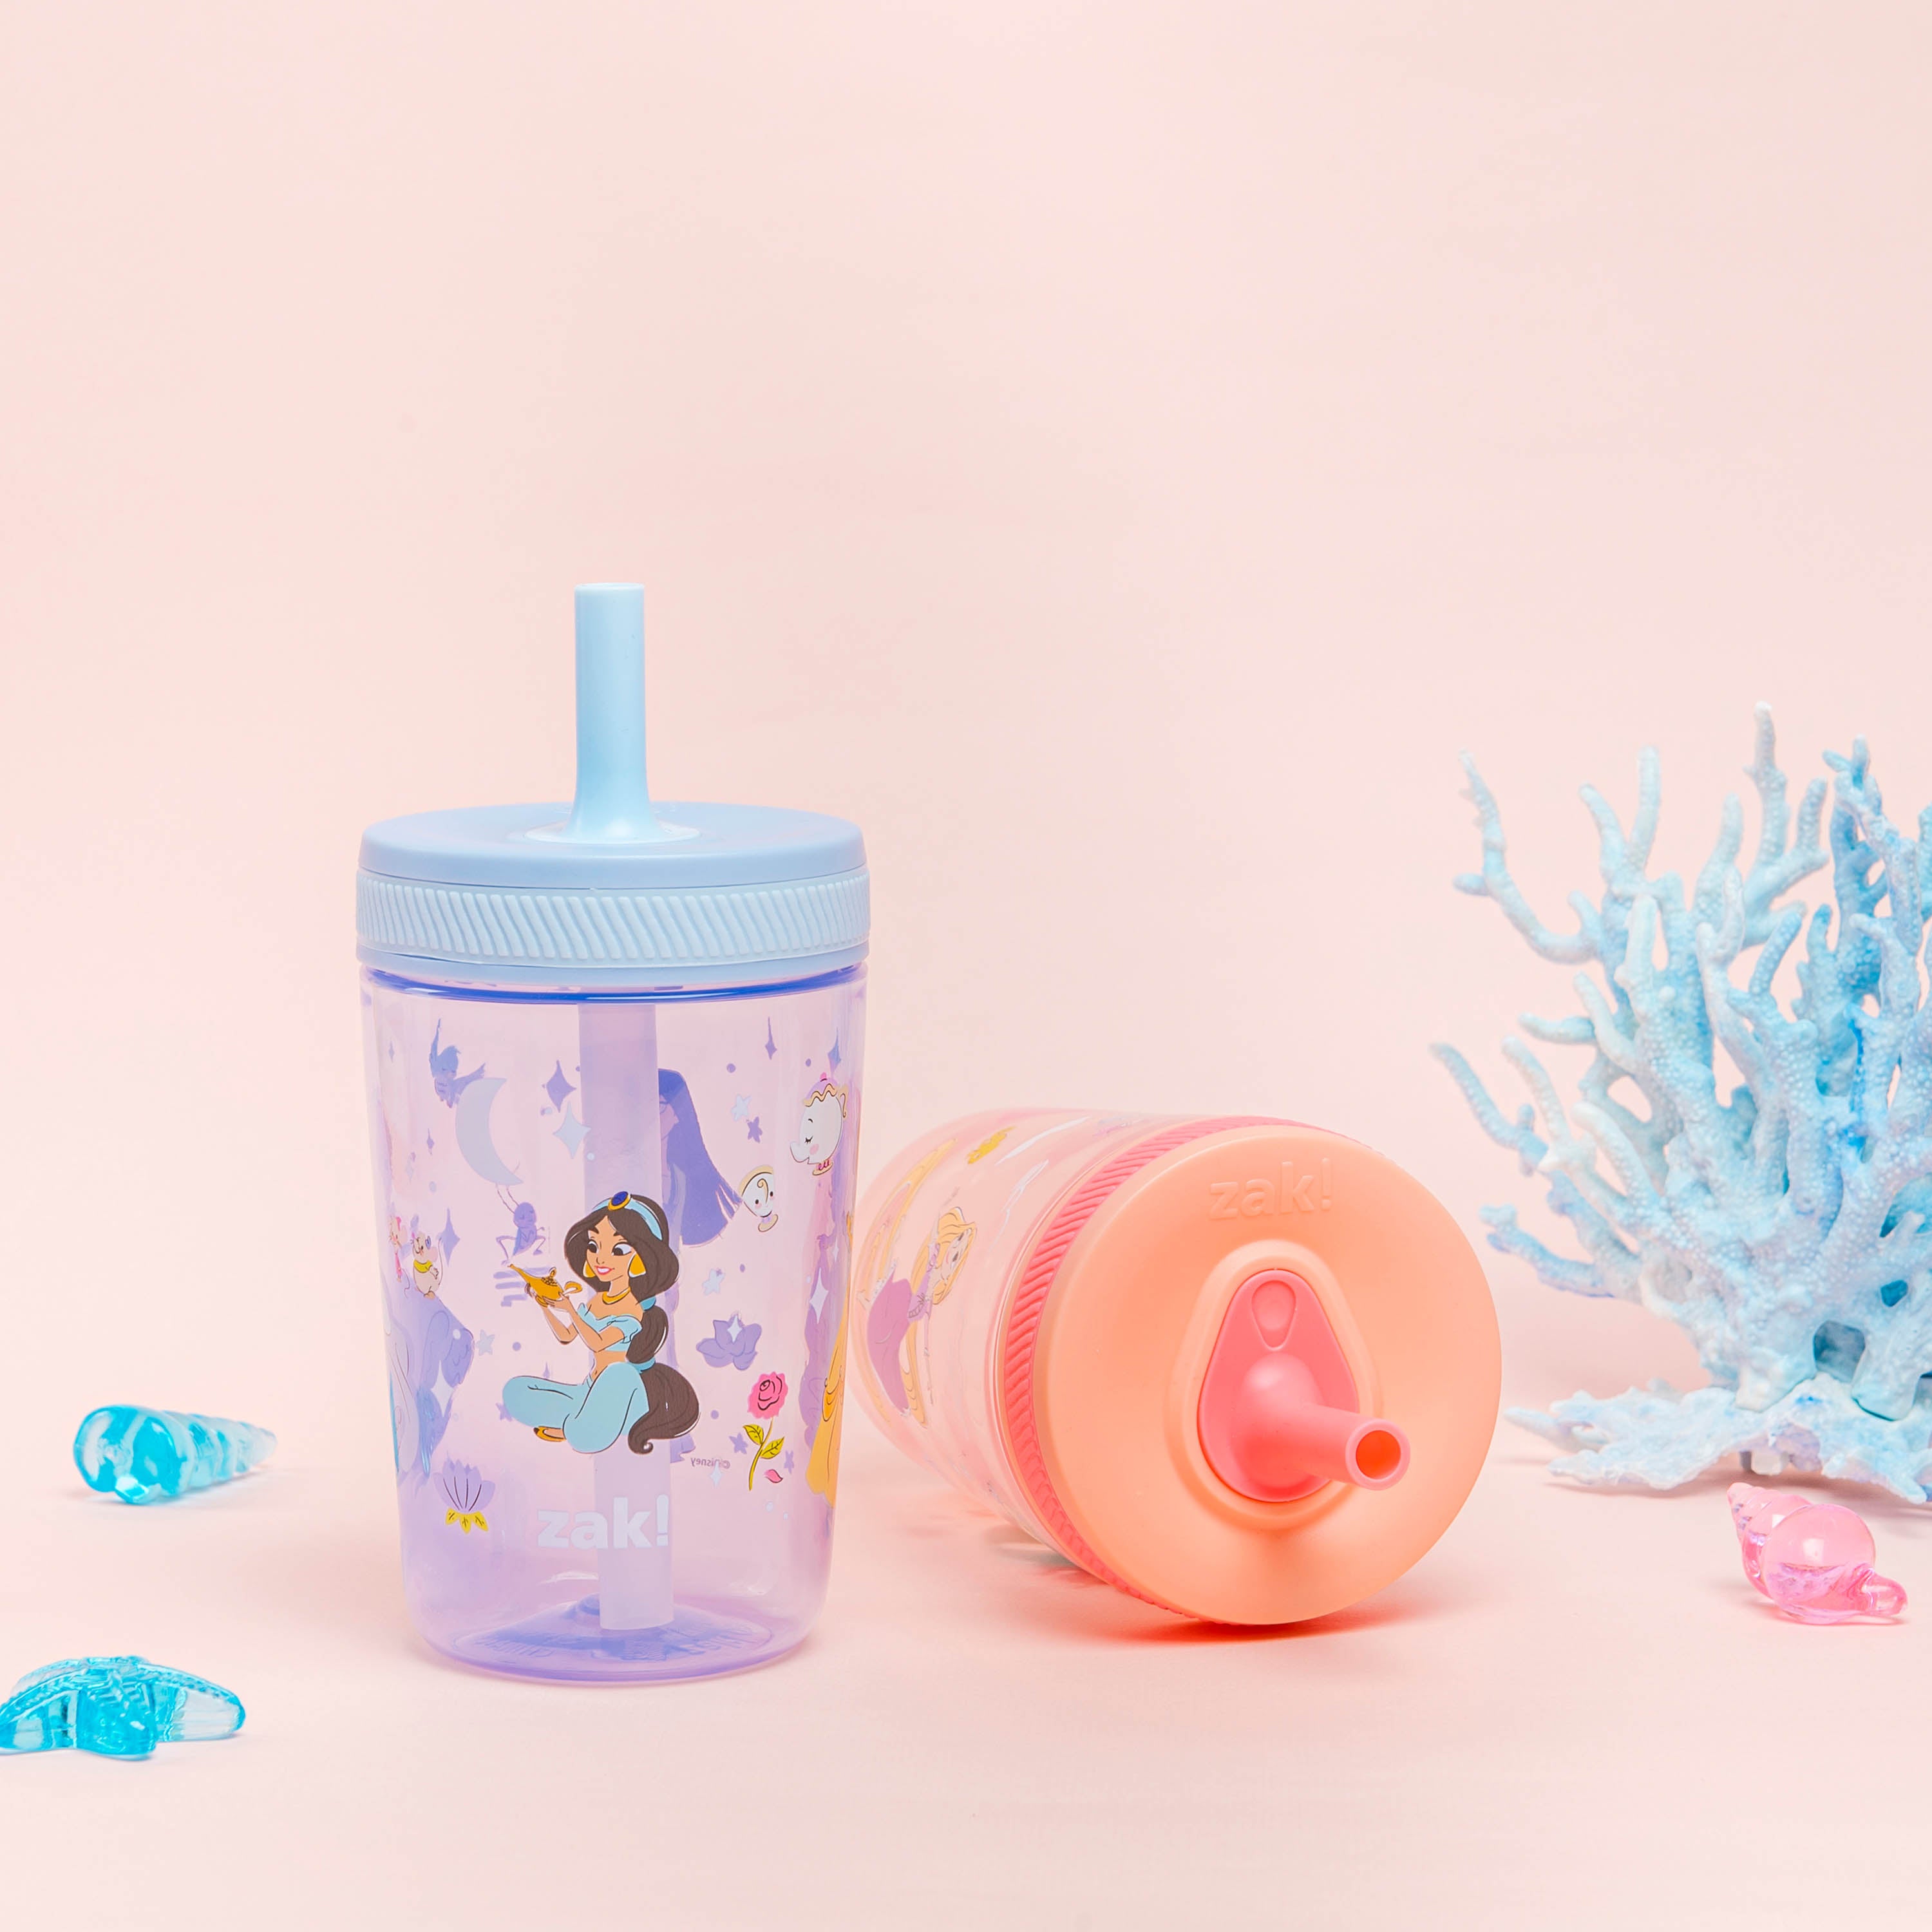 Disney Princess Insulated Spill-Proof Cups by The First Years